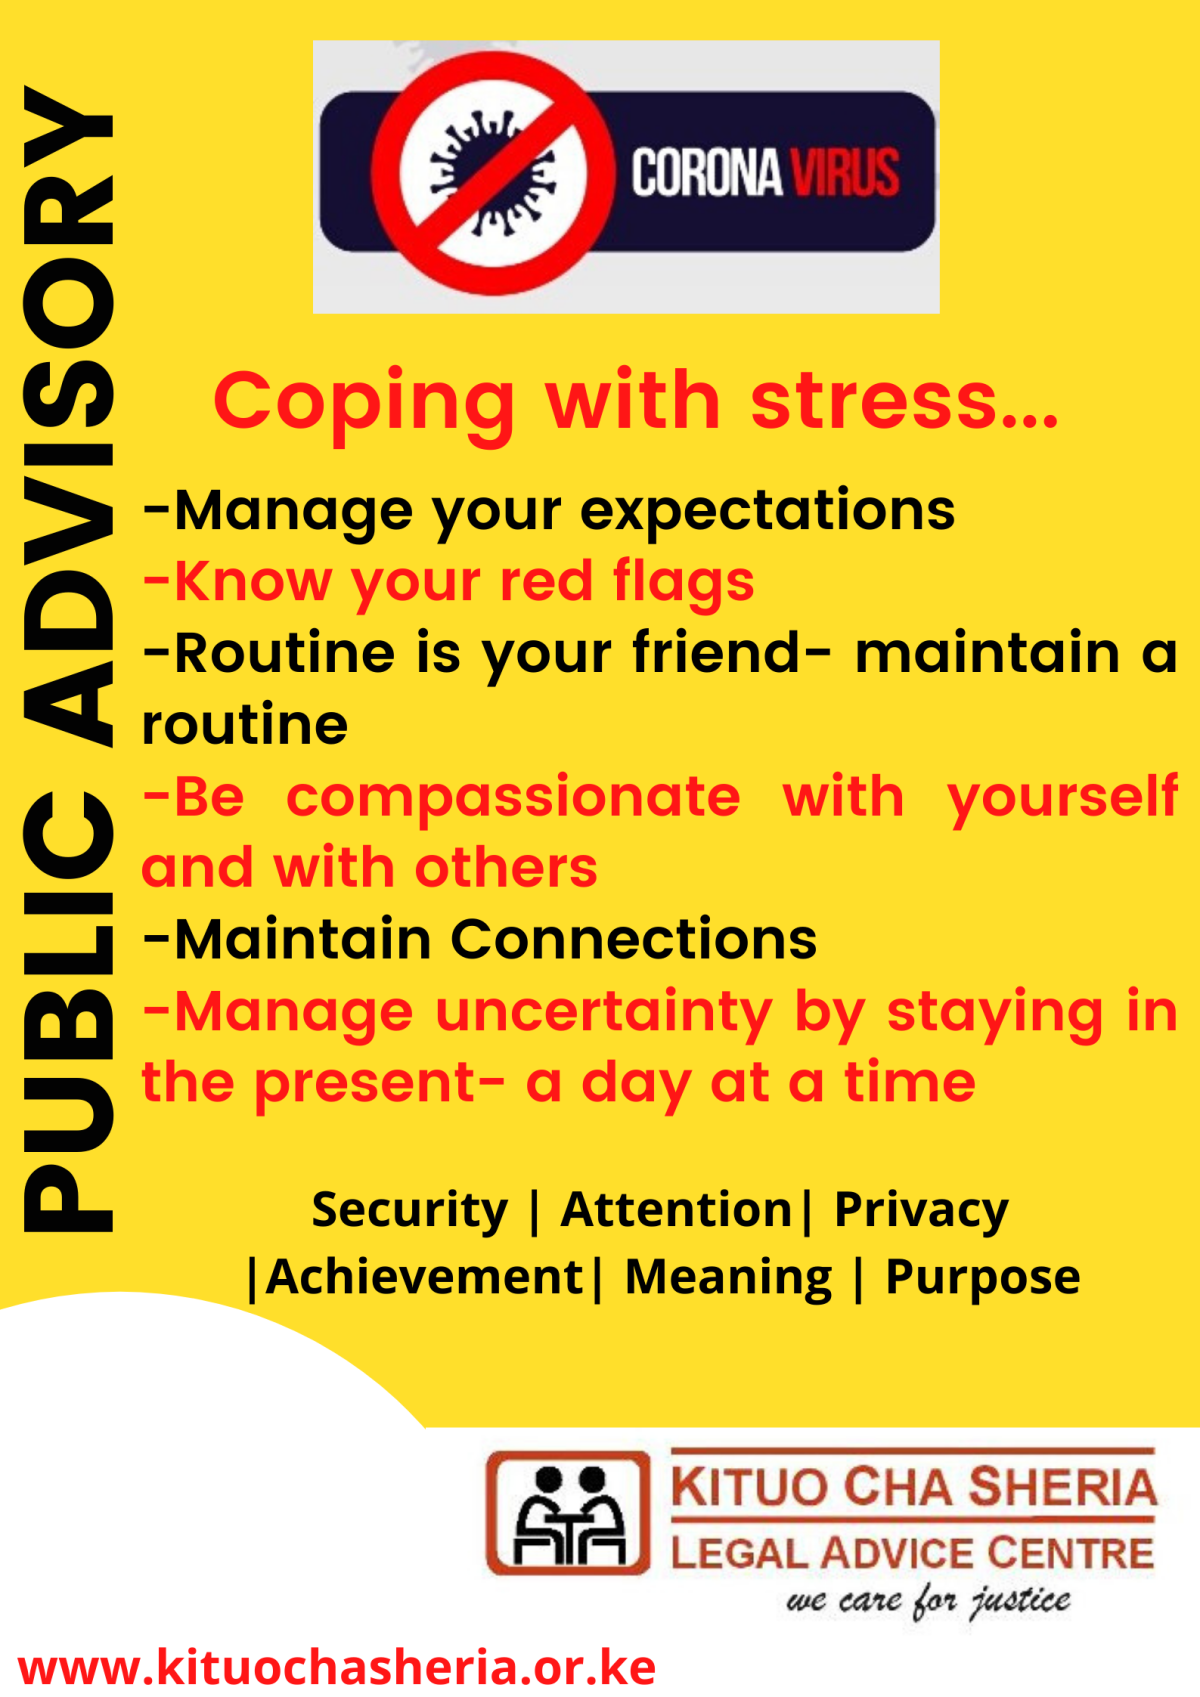 Coping with Stress during the COVID-19 (Coronavirus) pandemic